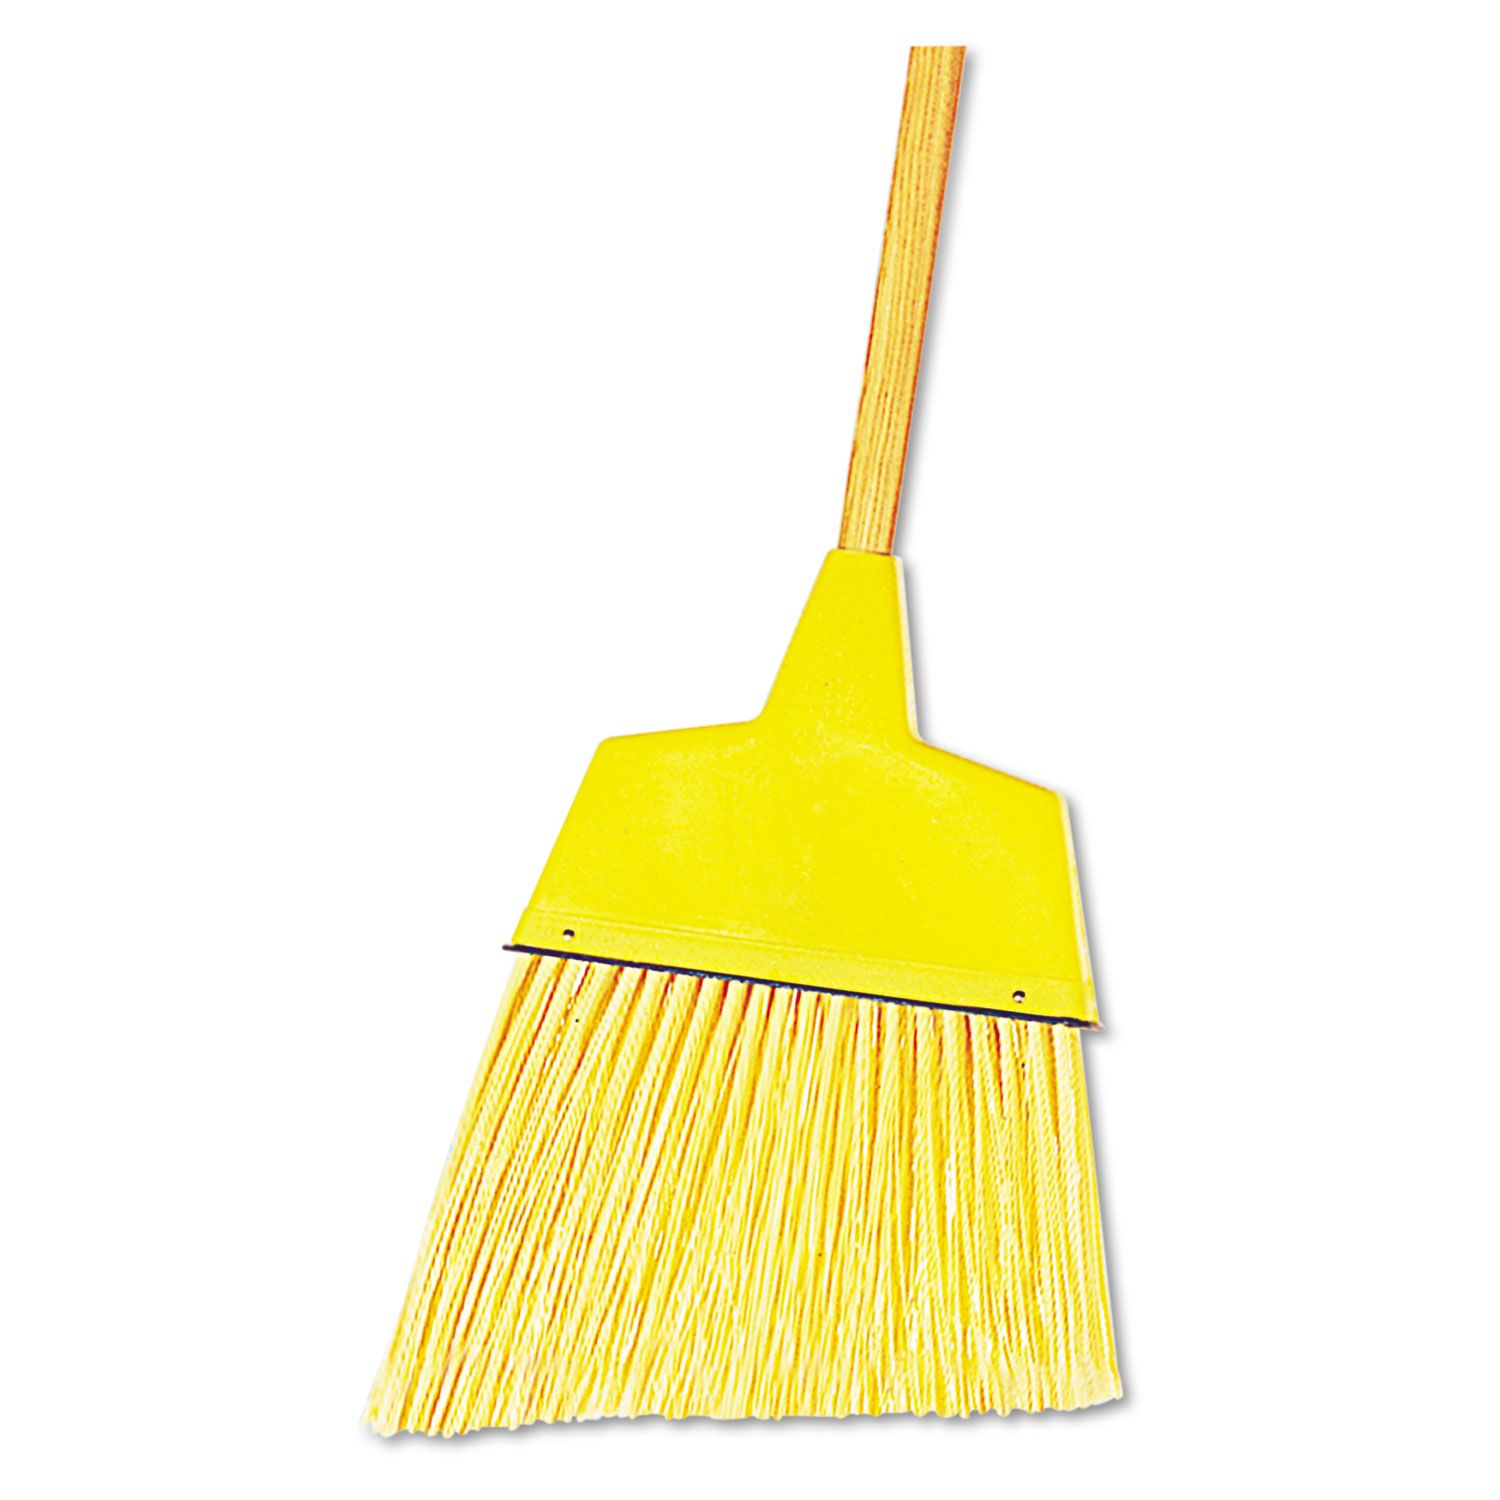 Upright Brooms and Dust Pans